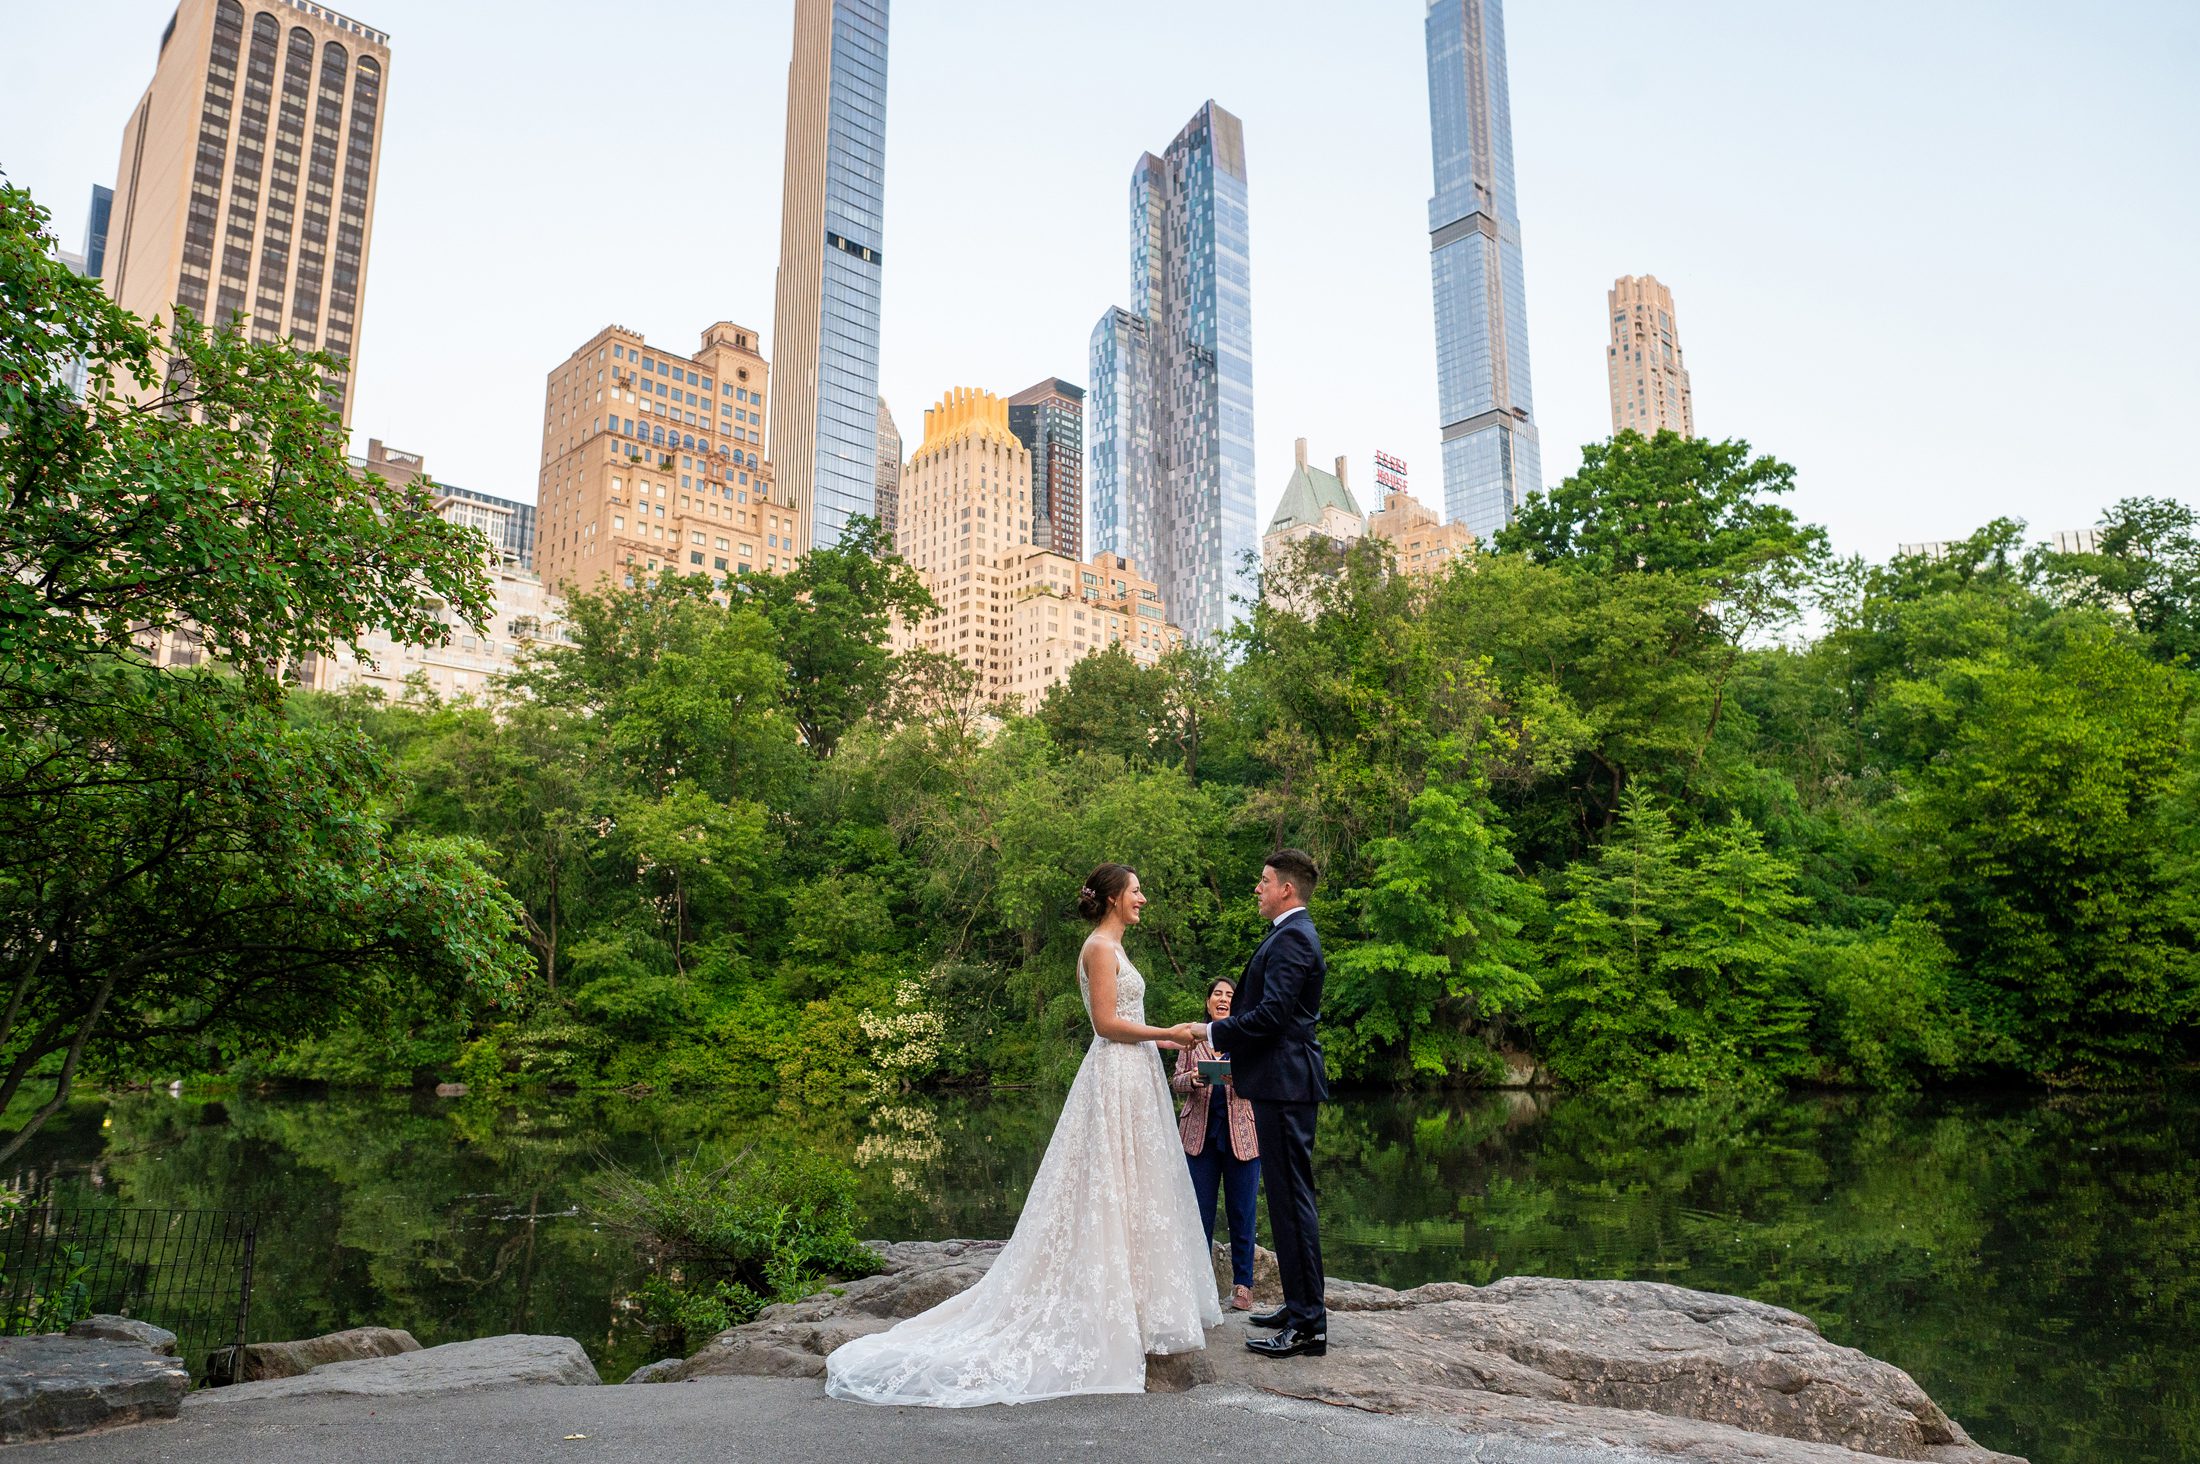 Sunrise wedding ceremony in Central Park NYC 